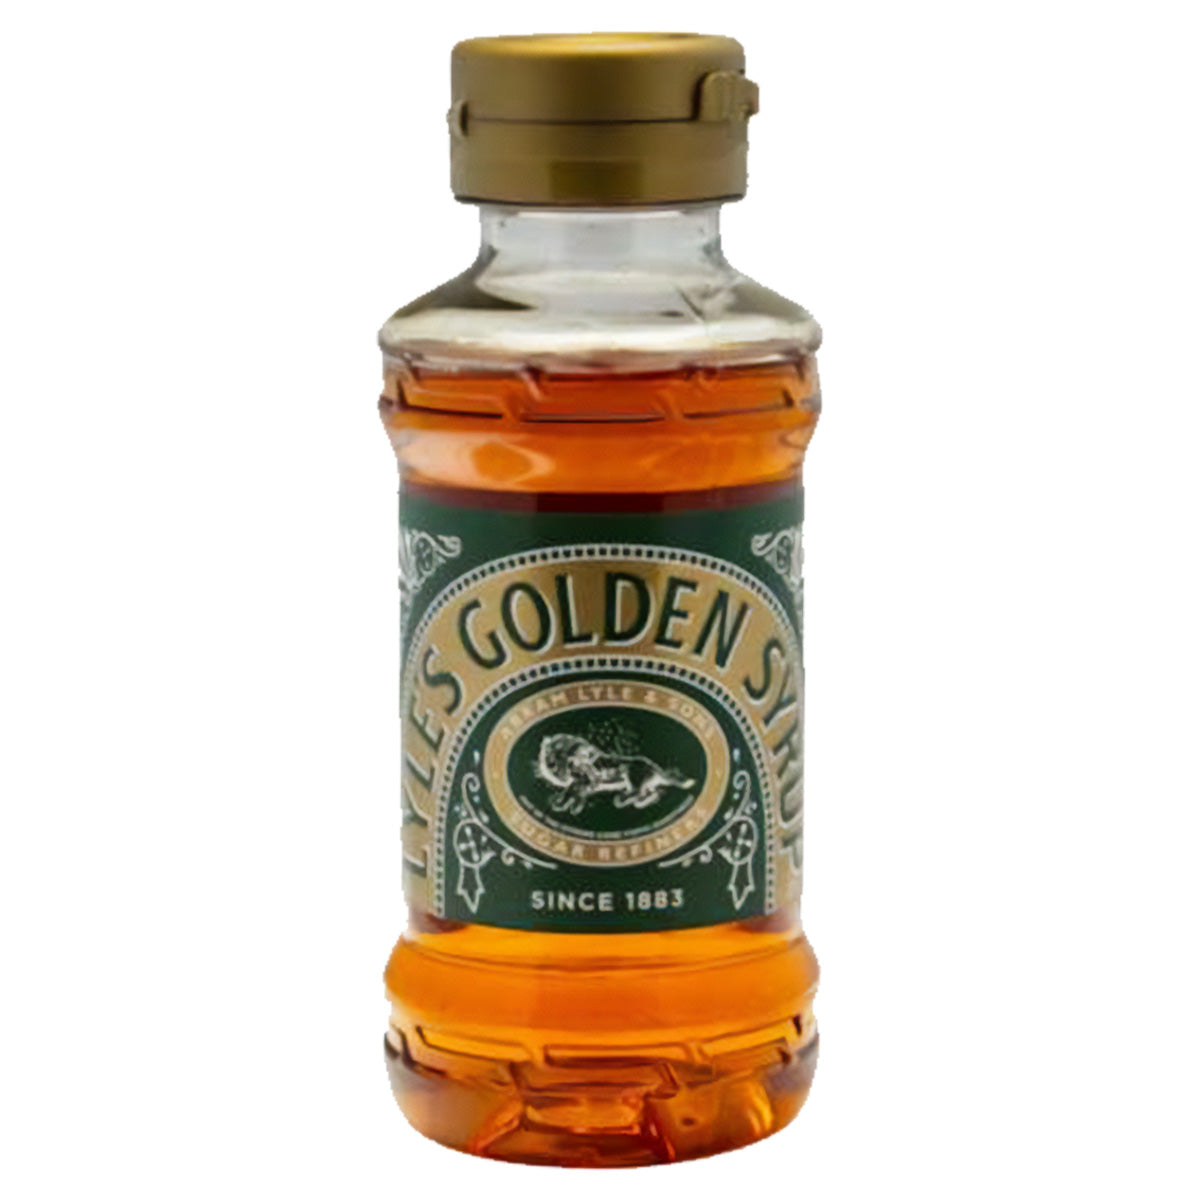 A bottle of Lyle's Golden Syrup - 325g on a white background.